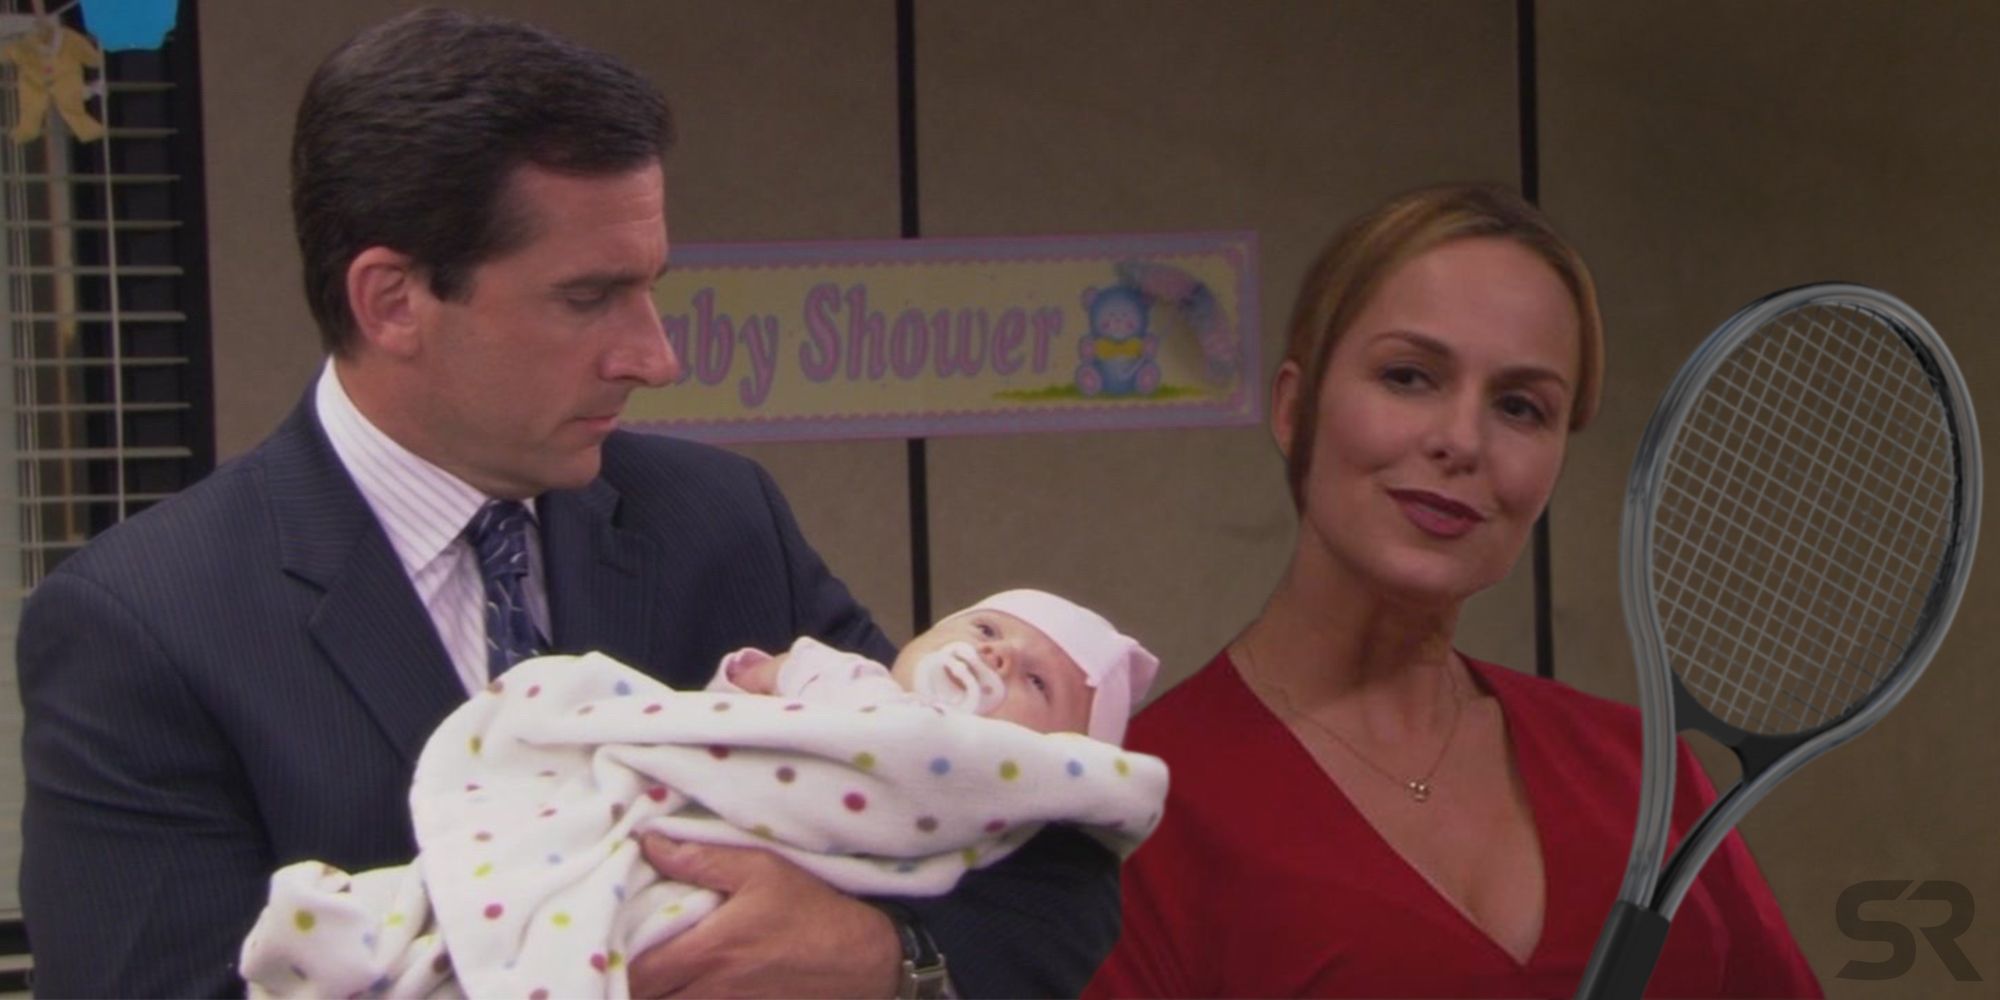 The father of Jan's baby on The Office is tennis star Andy Roddick